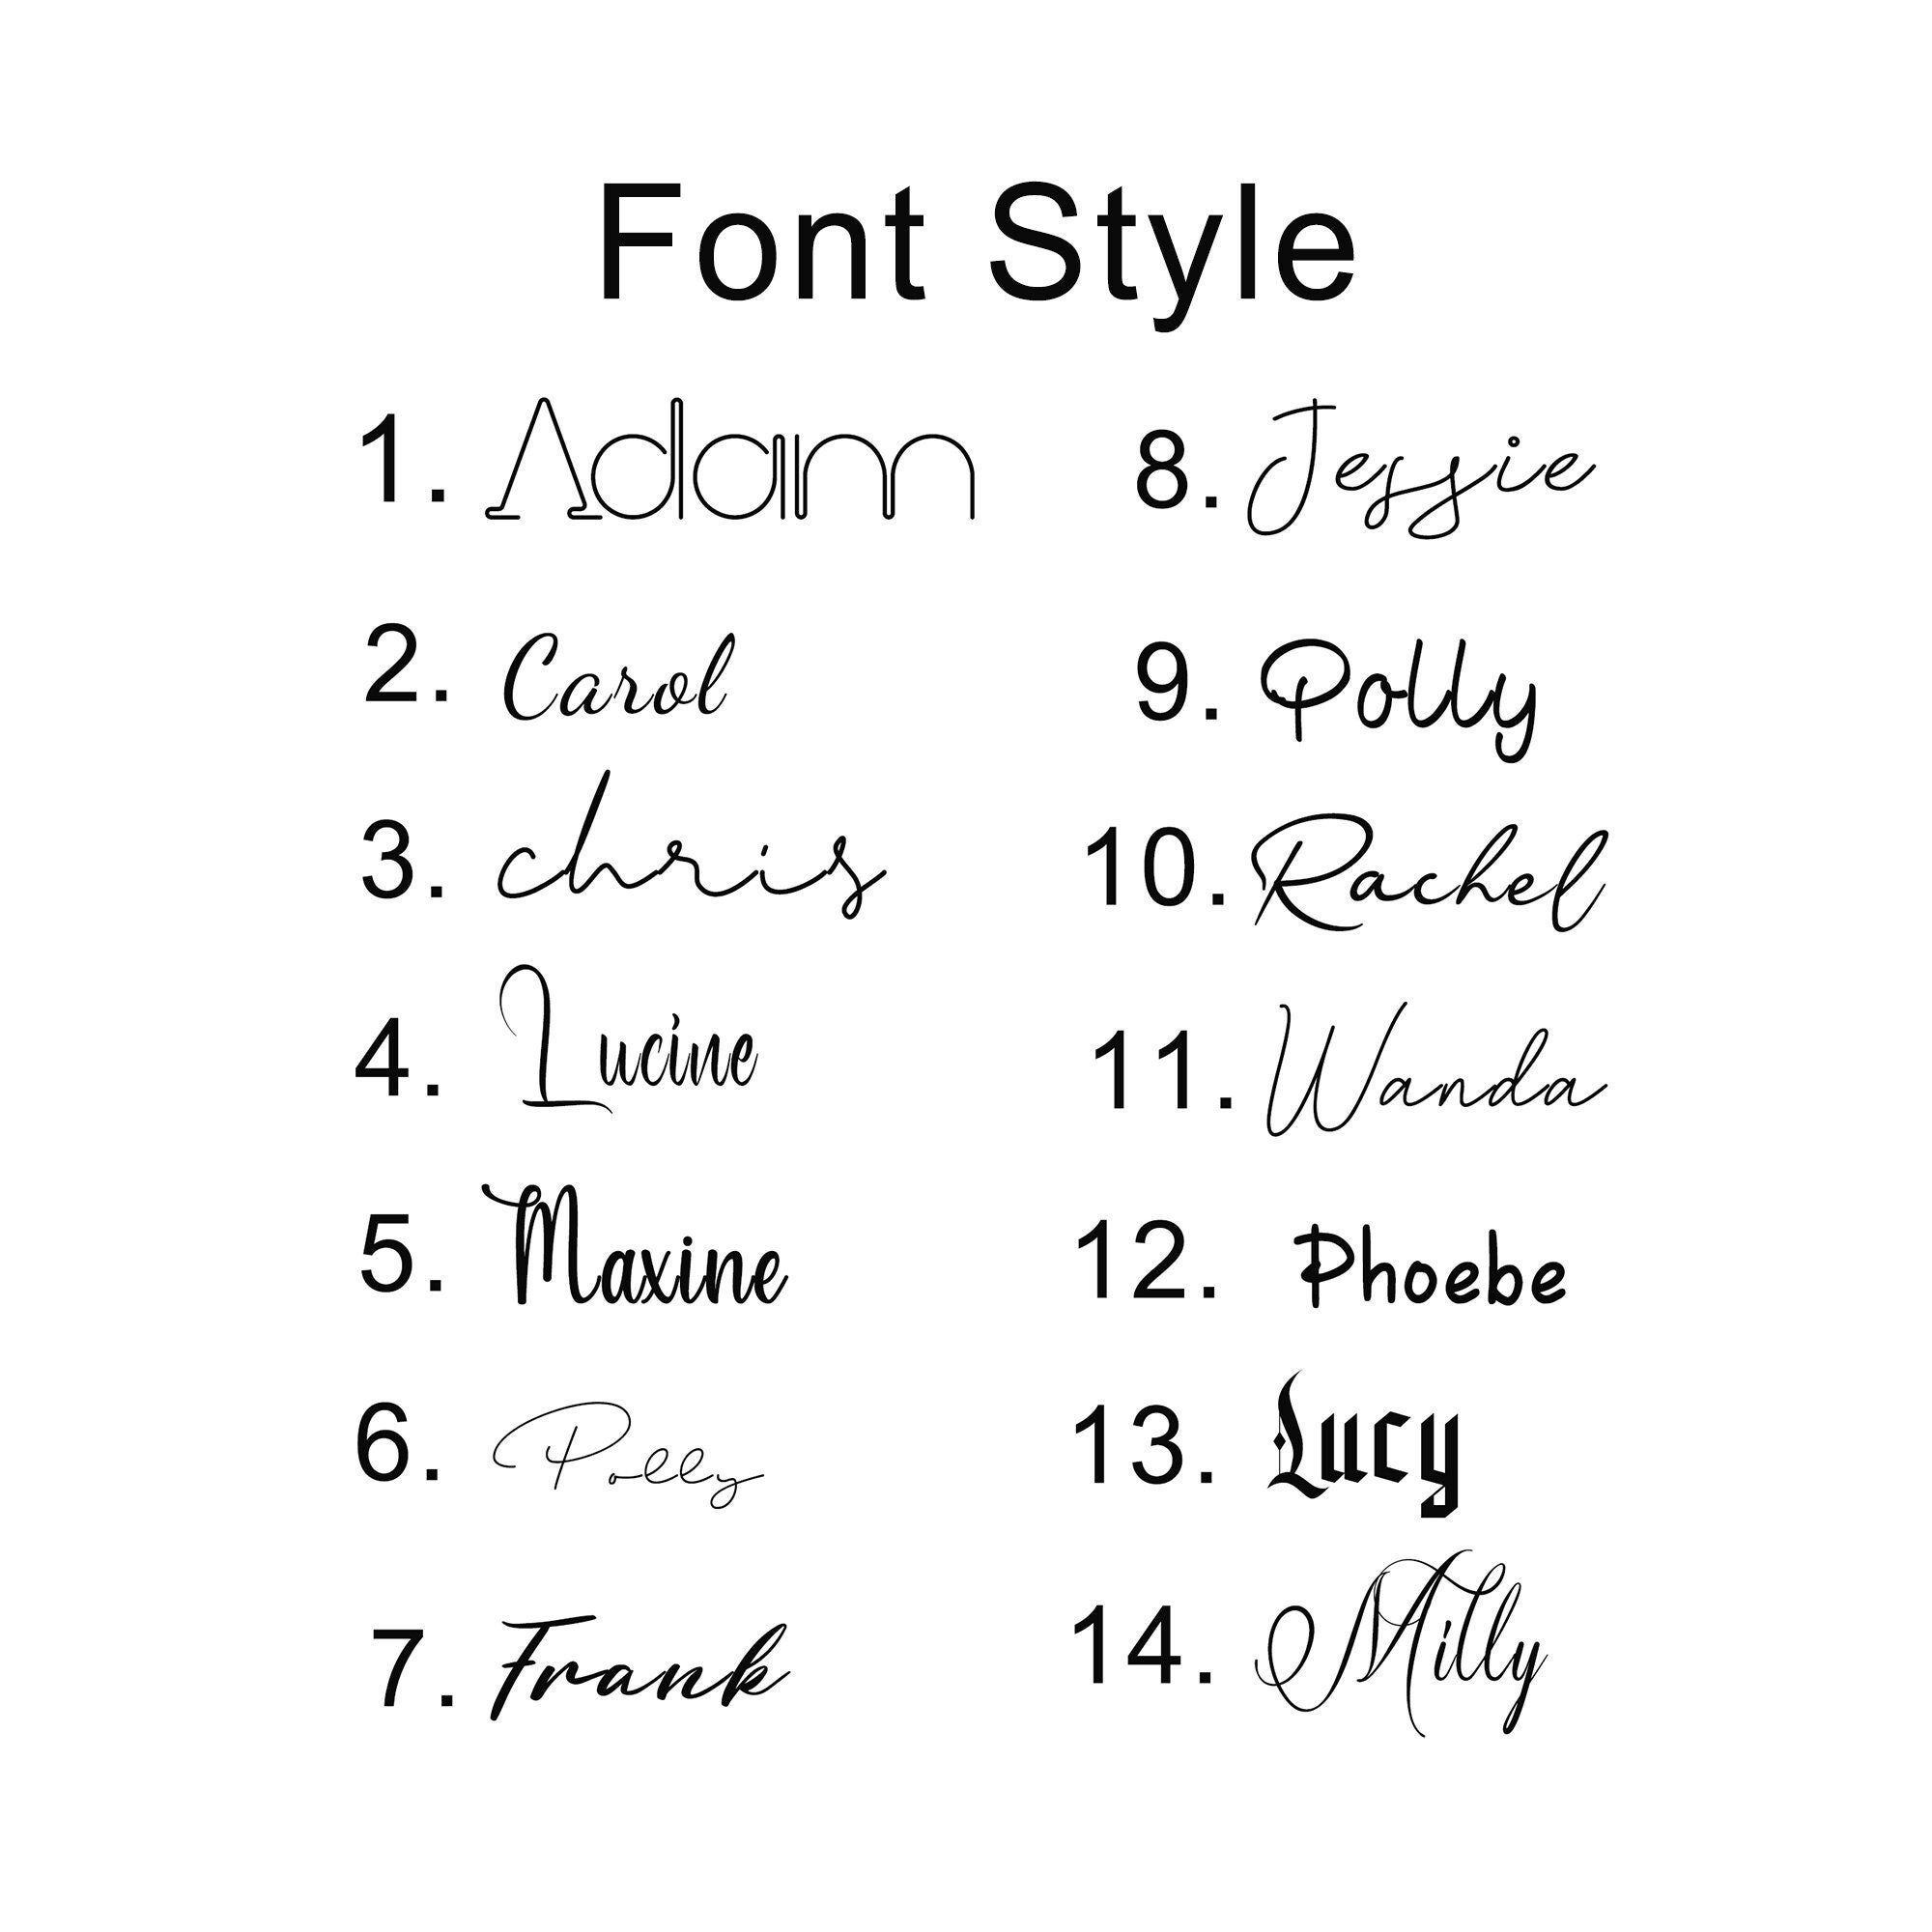 Daddys lil monster   tattoo font download free scetch